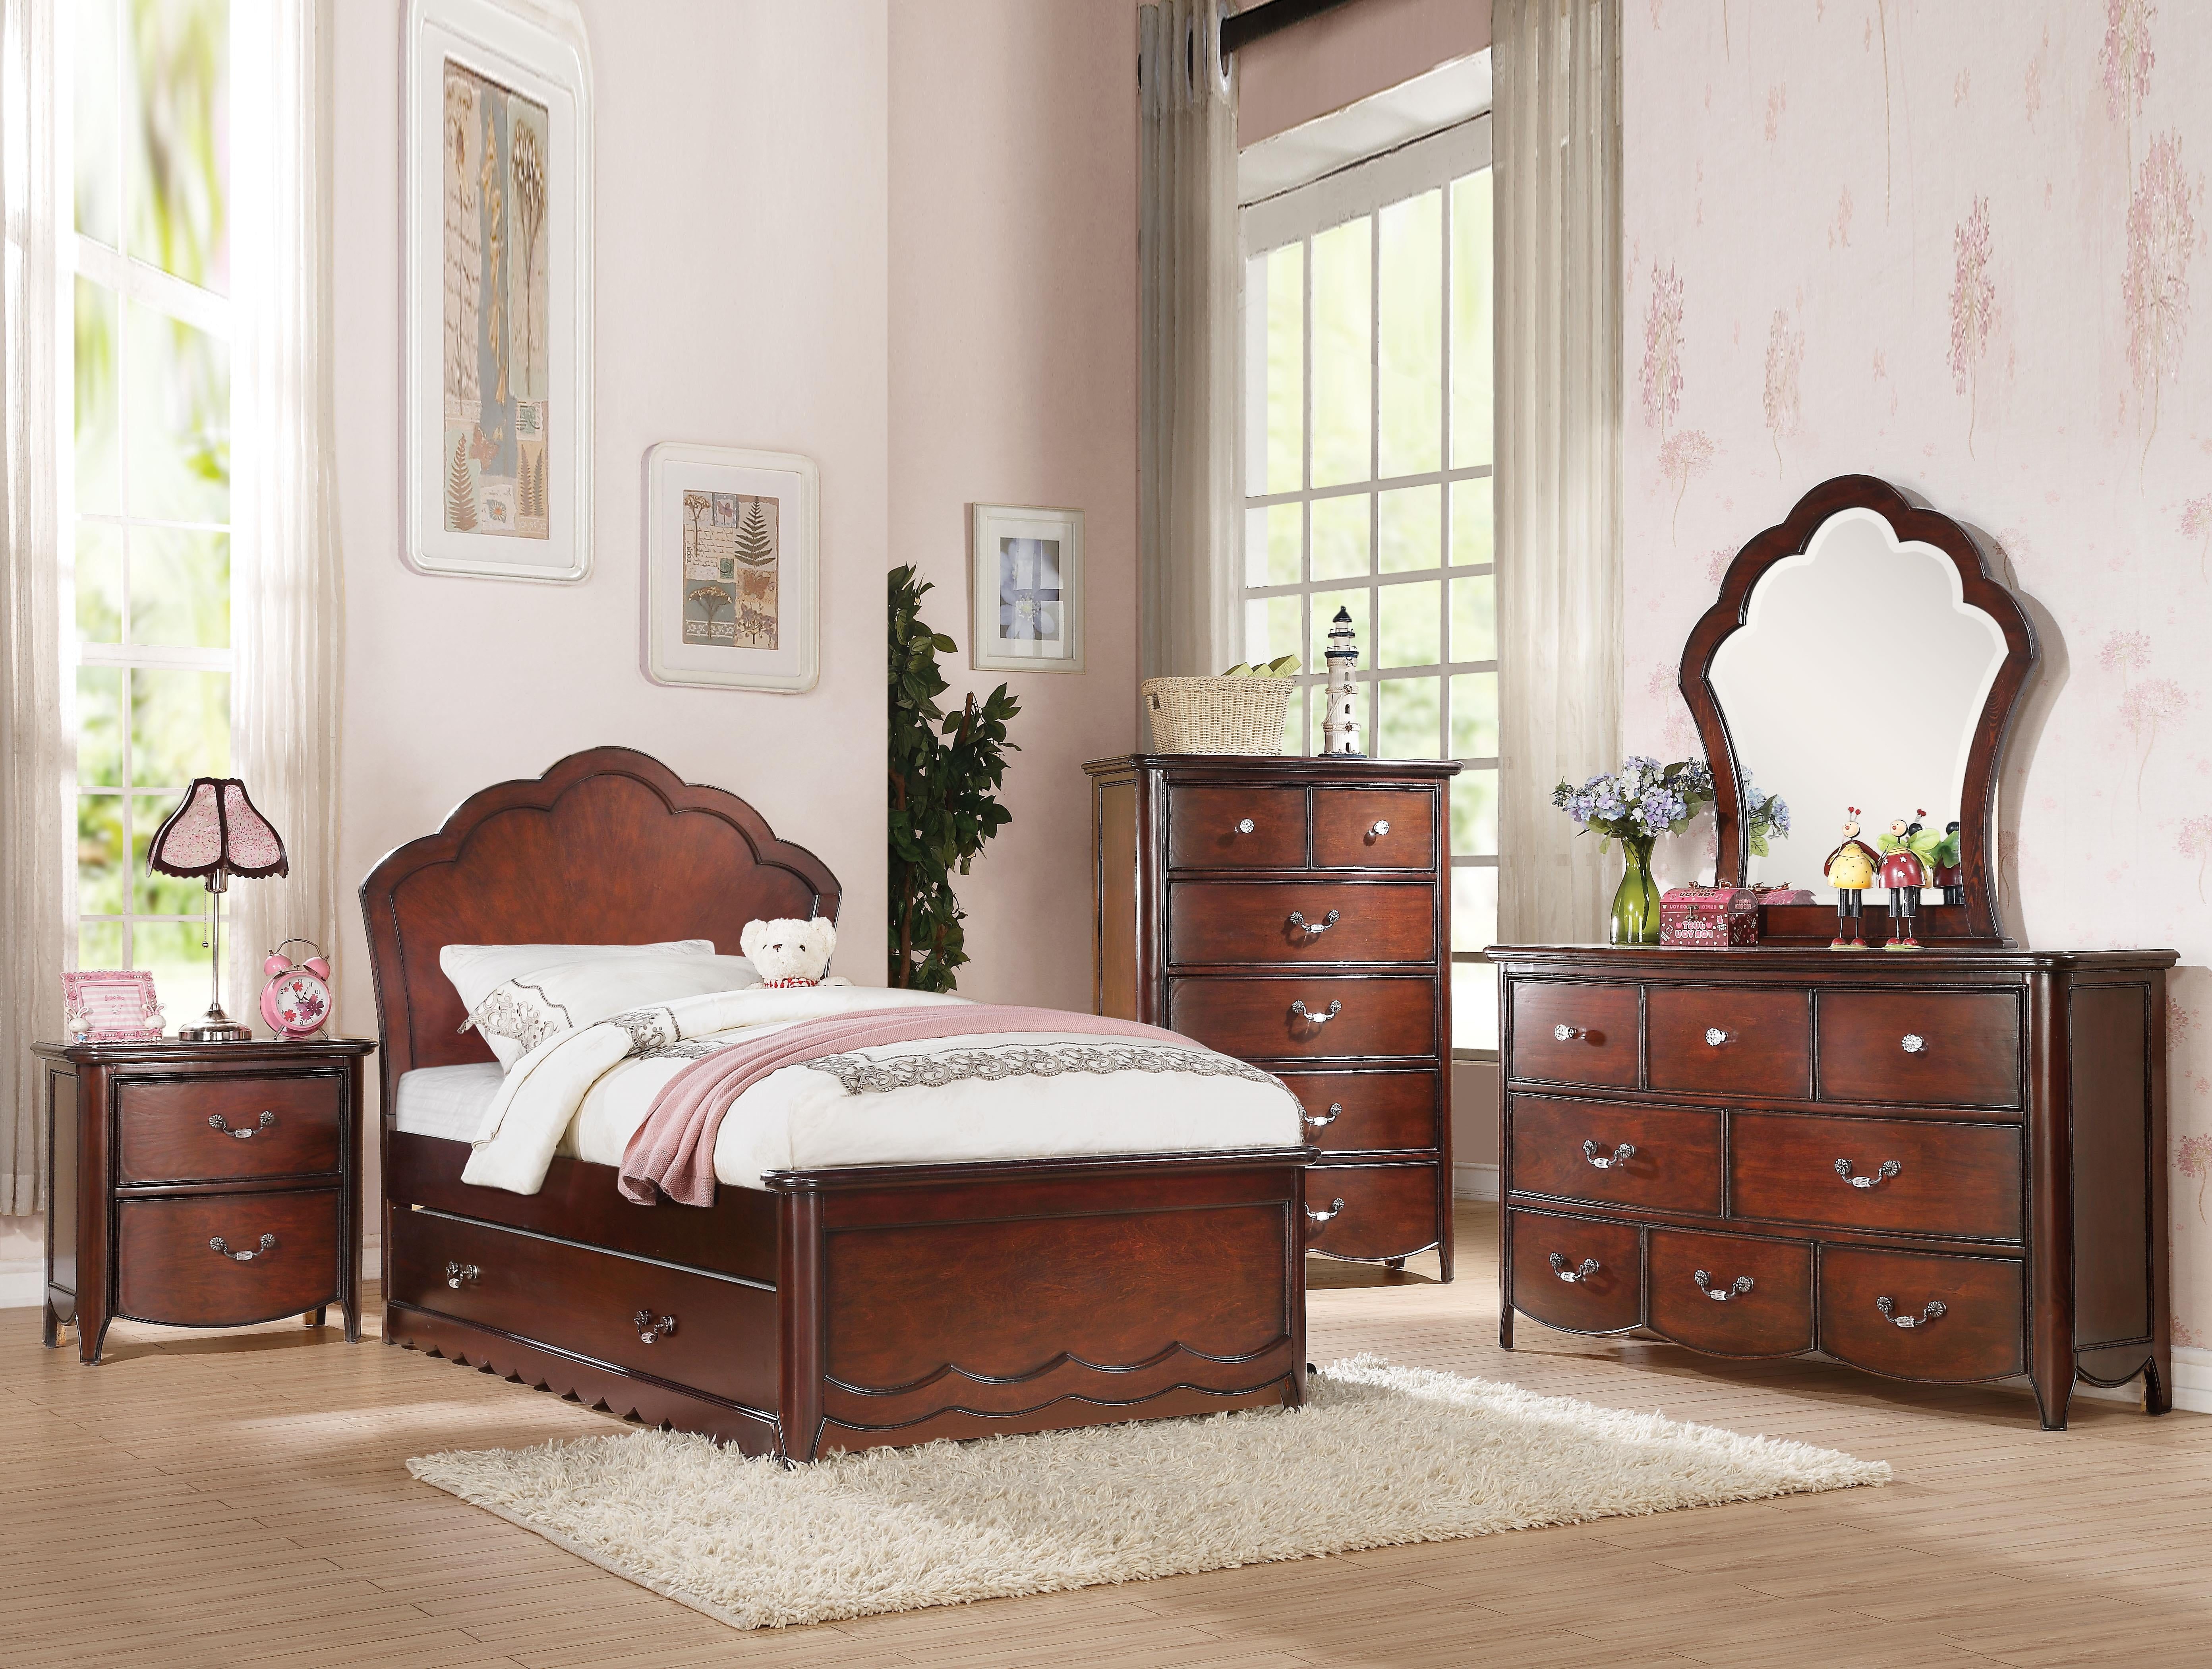 Acme Cecilie Twin Bed With Wooden Headboard In Cherry Multiple Sizes